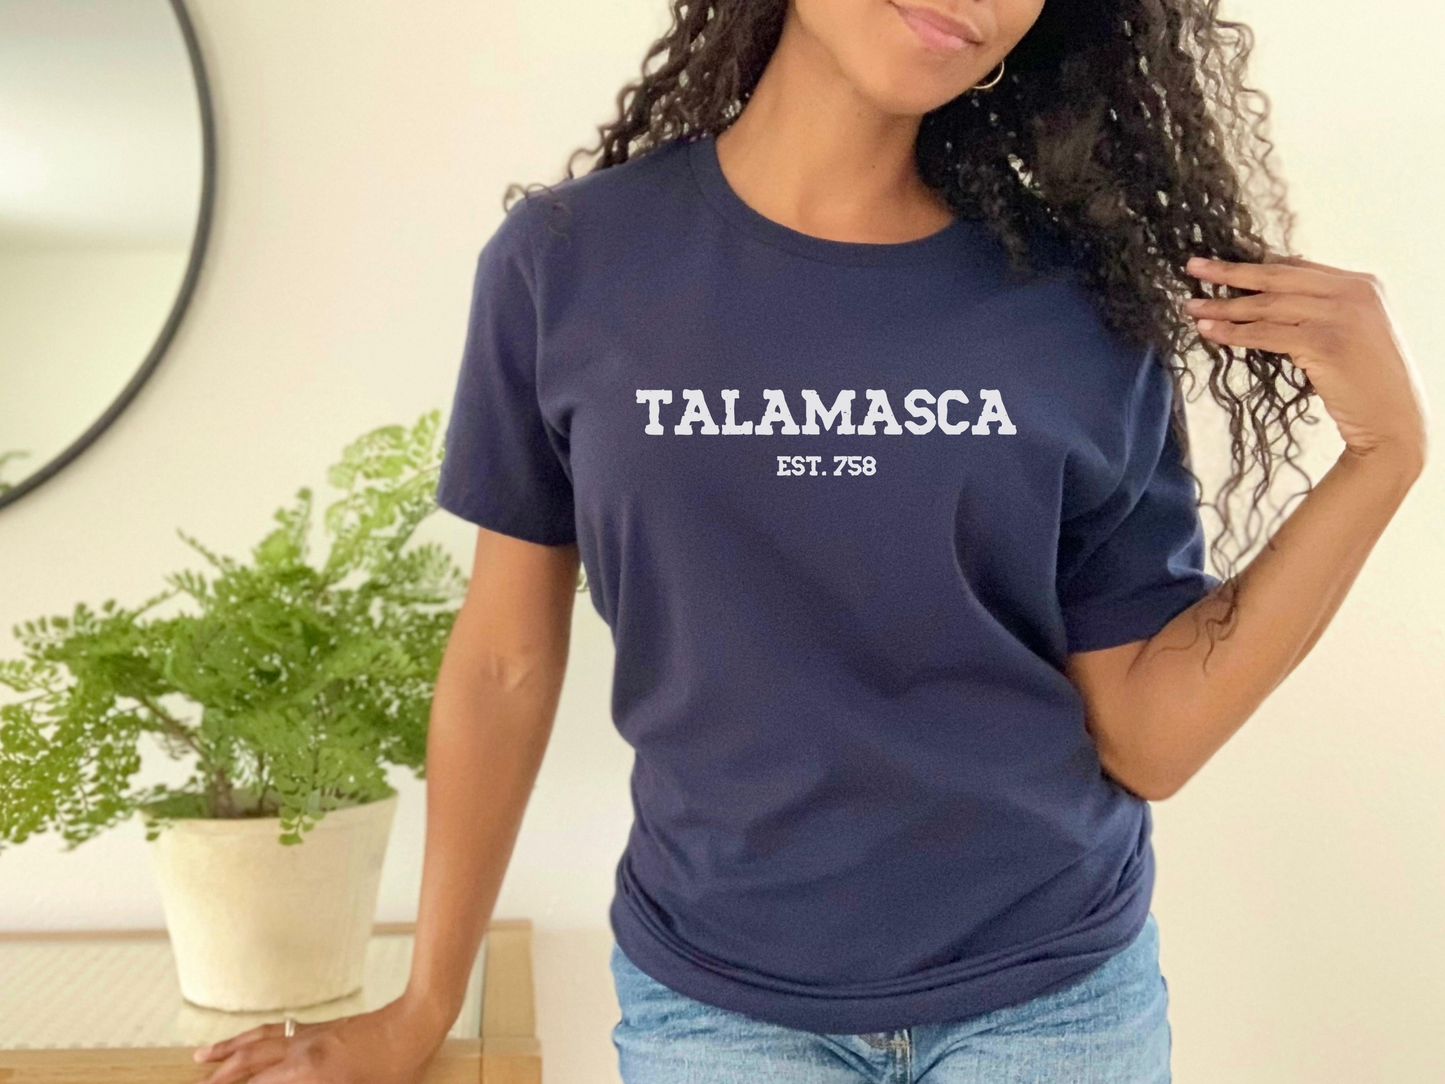 Talamasca Shirt, Interview with the Vampire, The Witching Hour, Mayfair Witches, Talamasca T-shirt, Bookish Gifts, Bookish Shirt